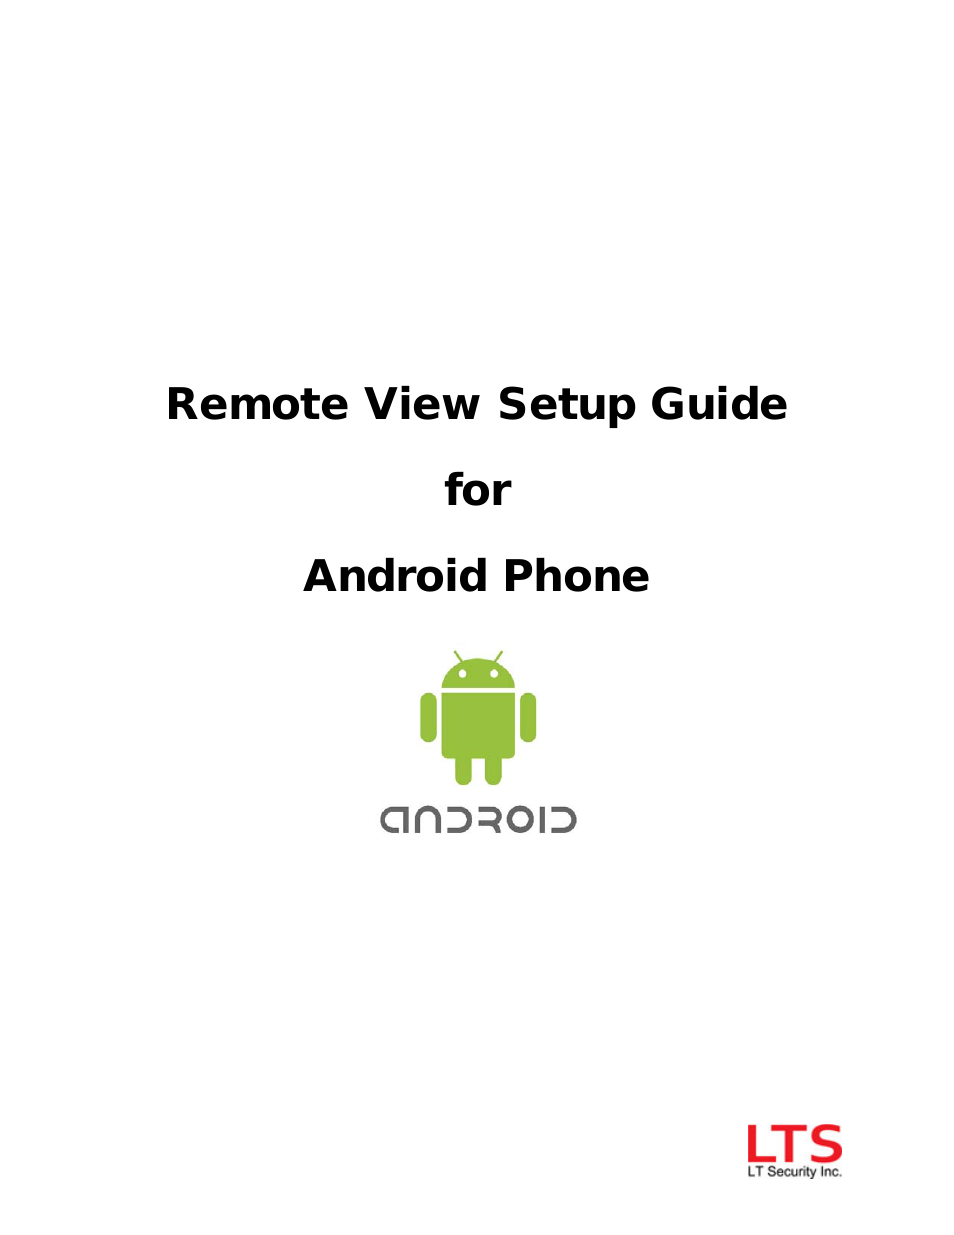 Remote View Setup Guide for Android Phone